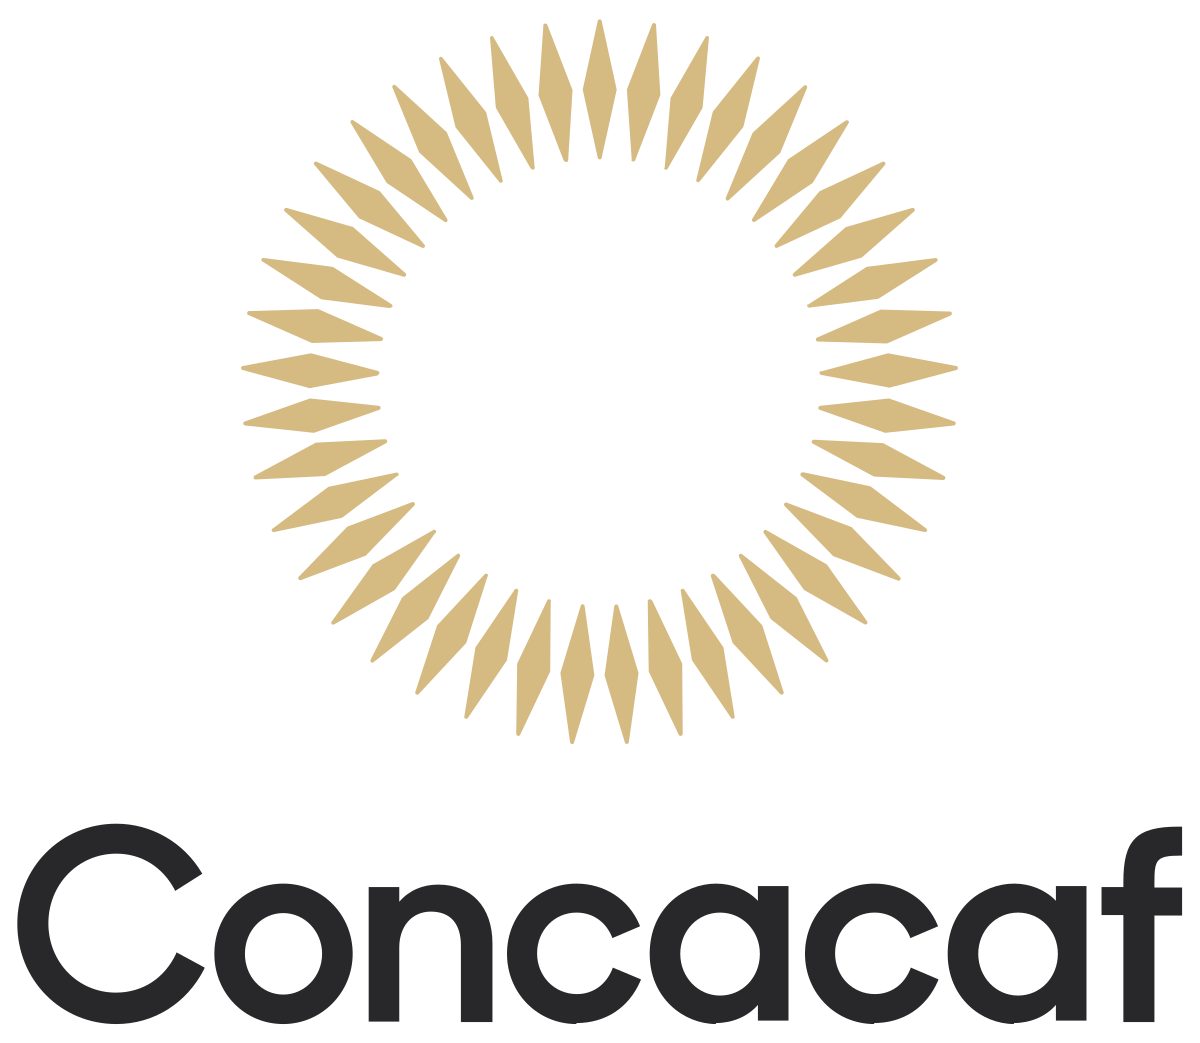 Concacaf Wikipedia